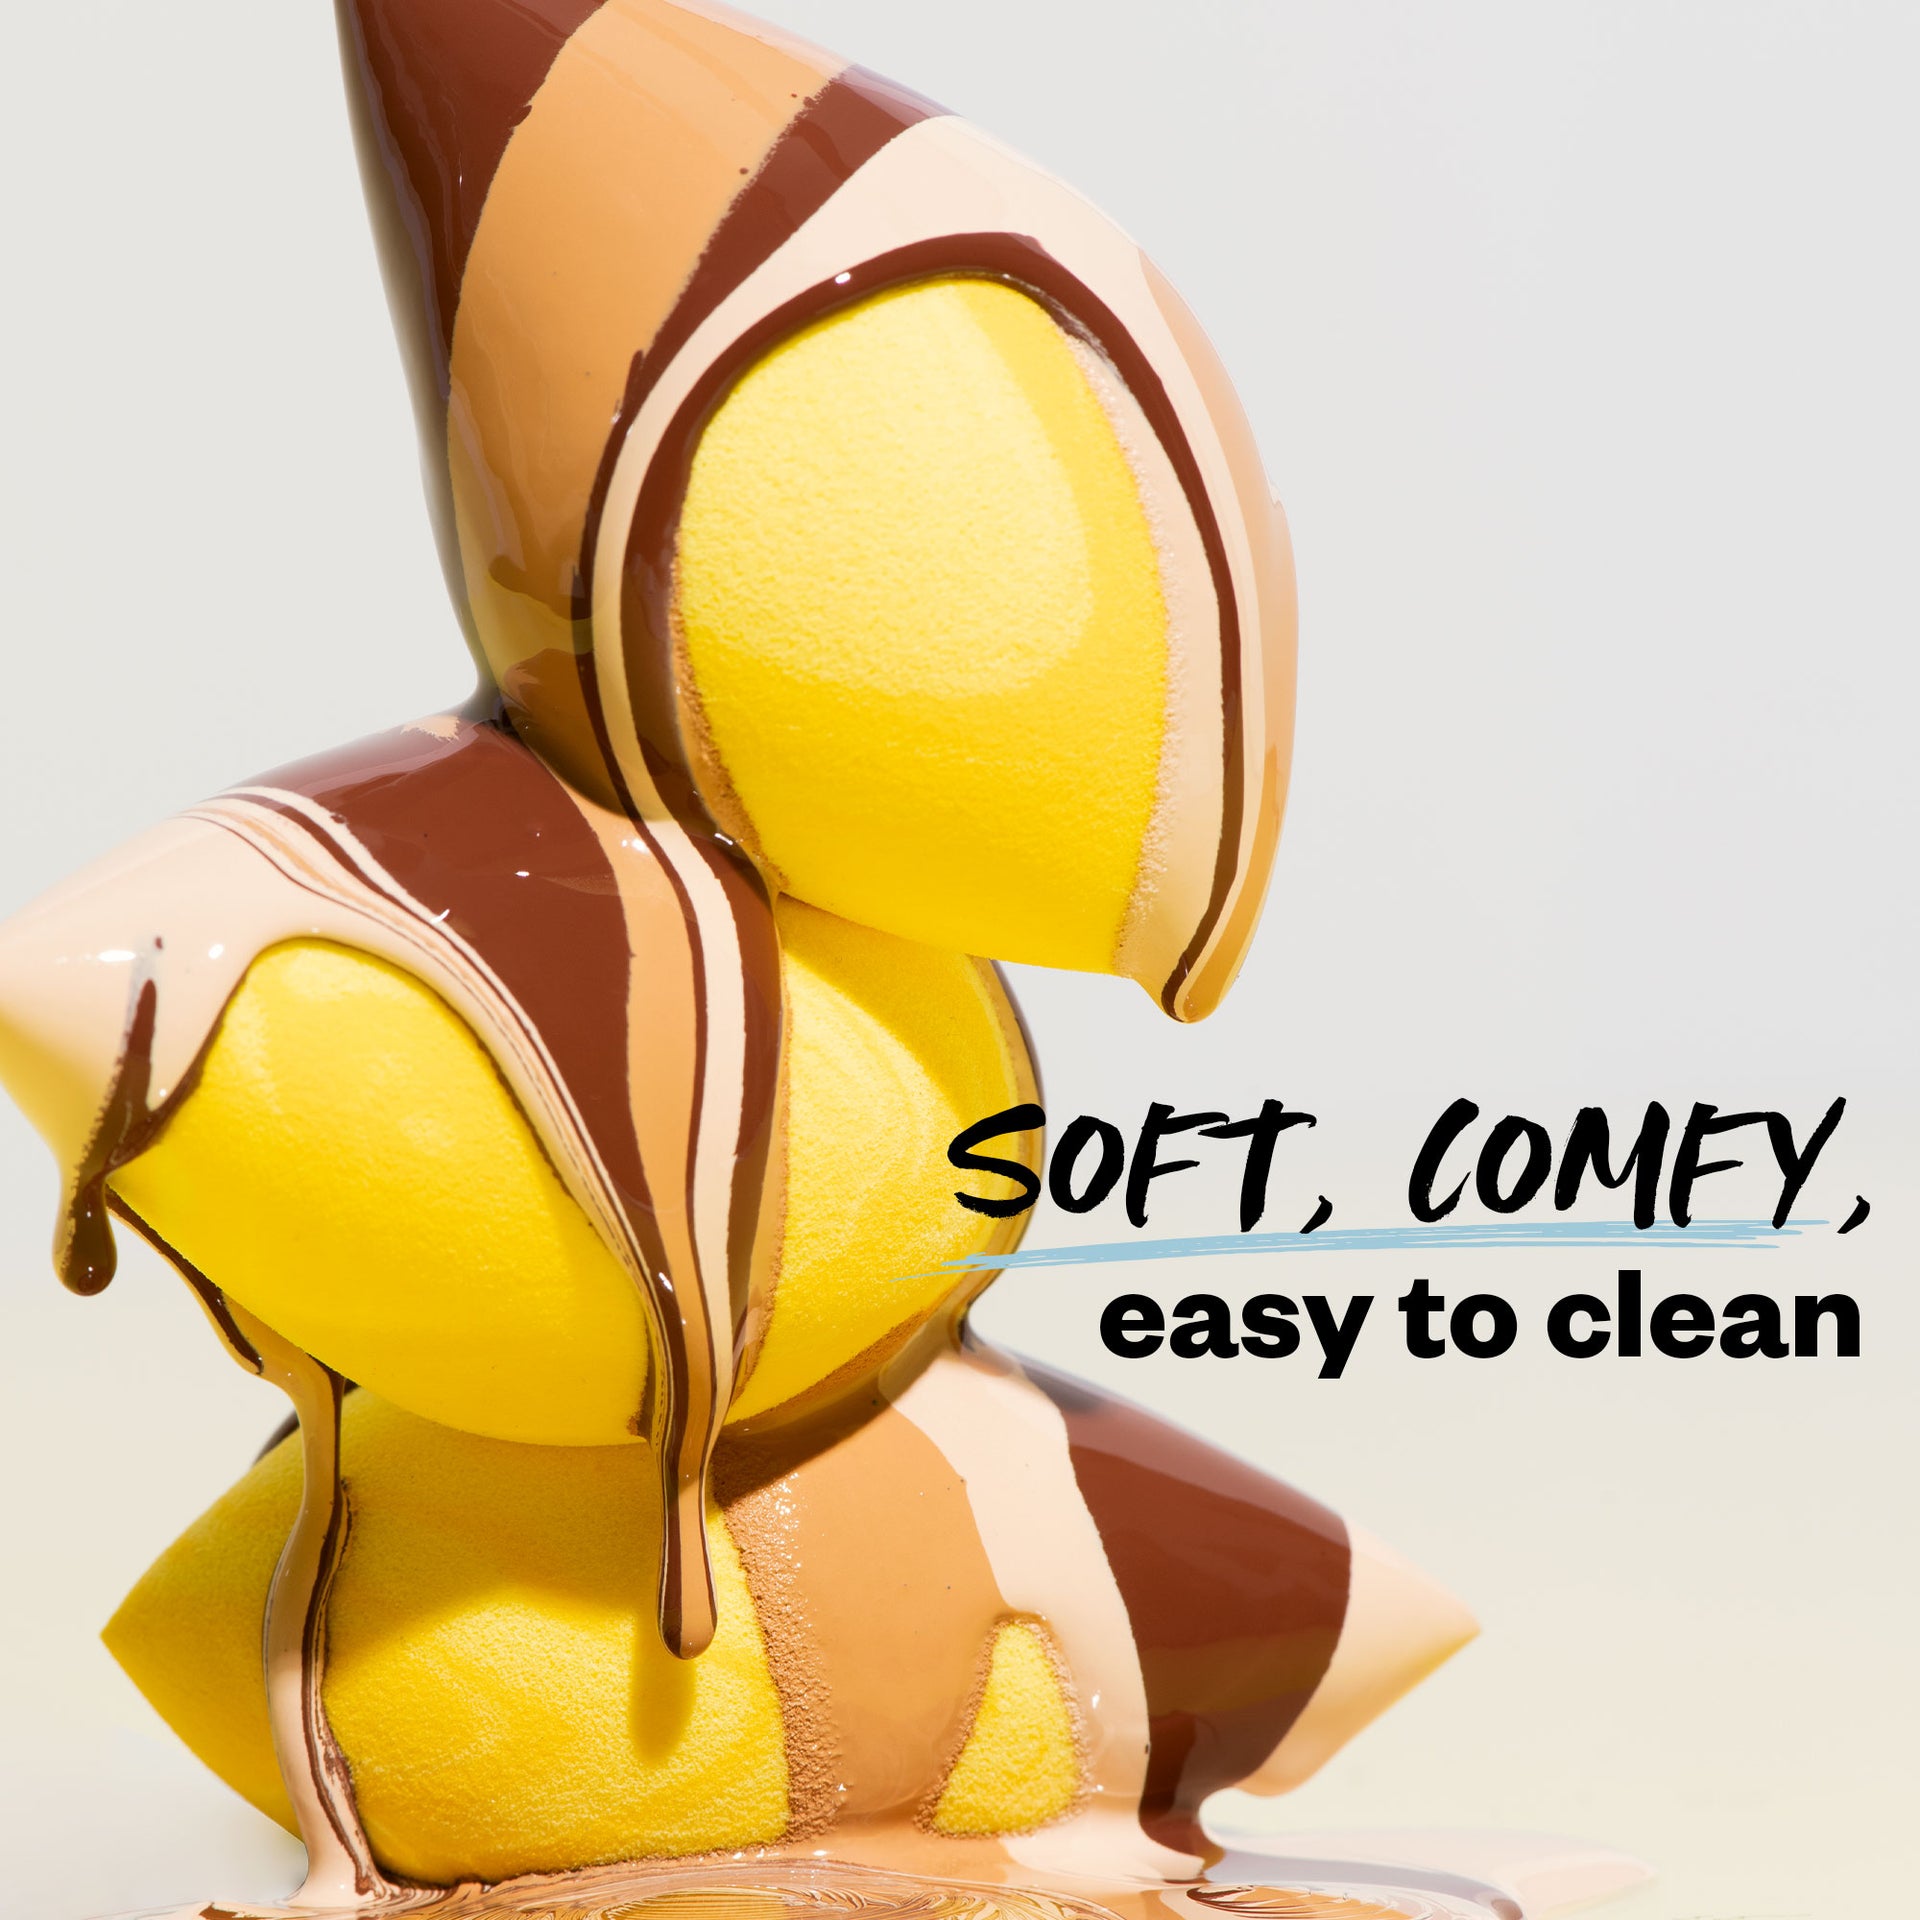 Soft, Fluffy, Easy to Clean